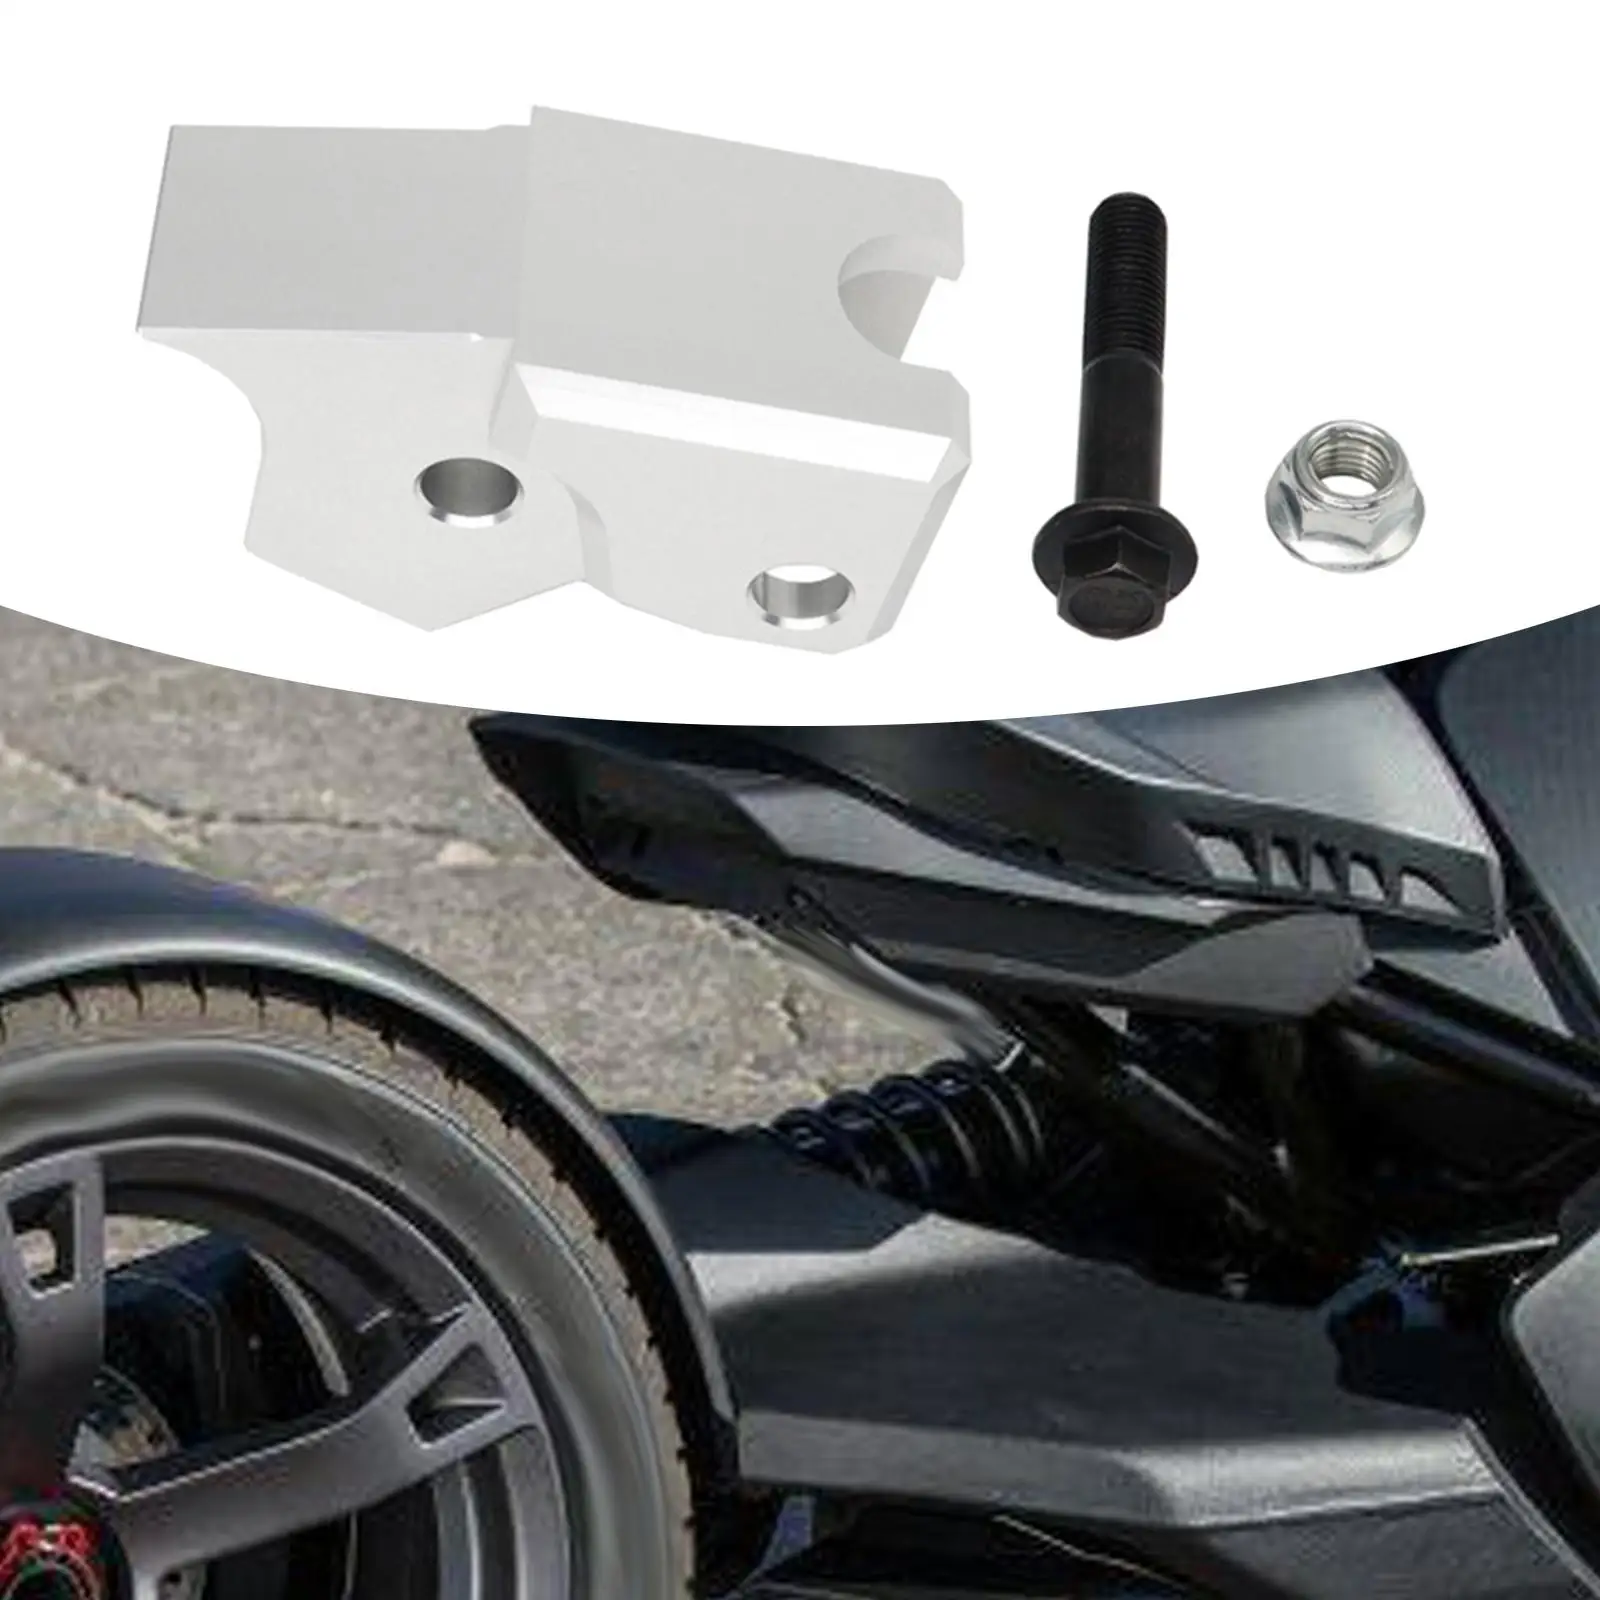 

Rear Shock Lift Set Accessories Easy to Use Anodizing Auto Parts for Bombardier Can-am Rally 2021 and below Ryker 600-900